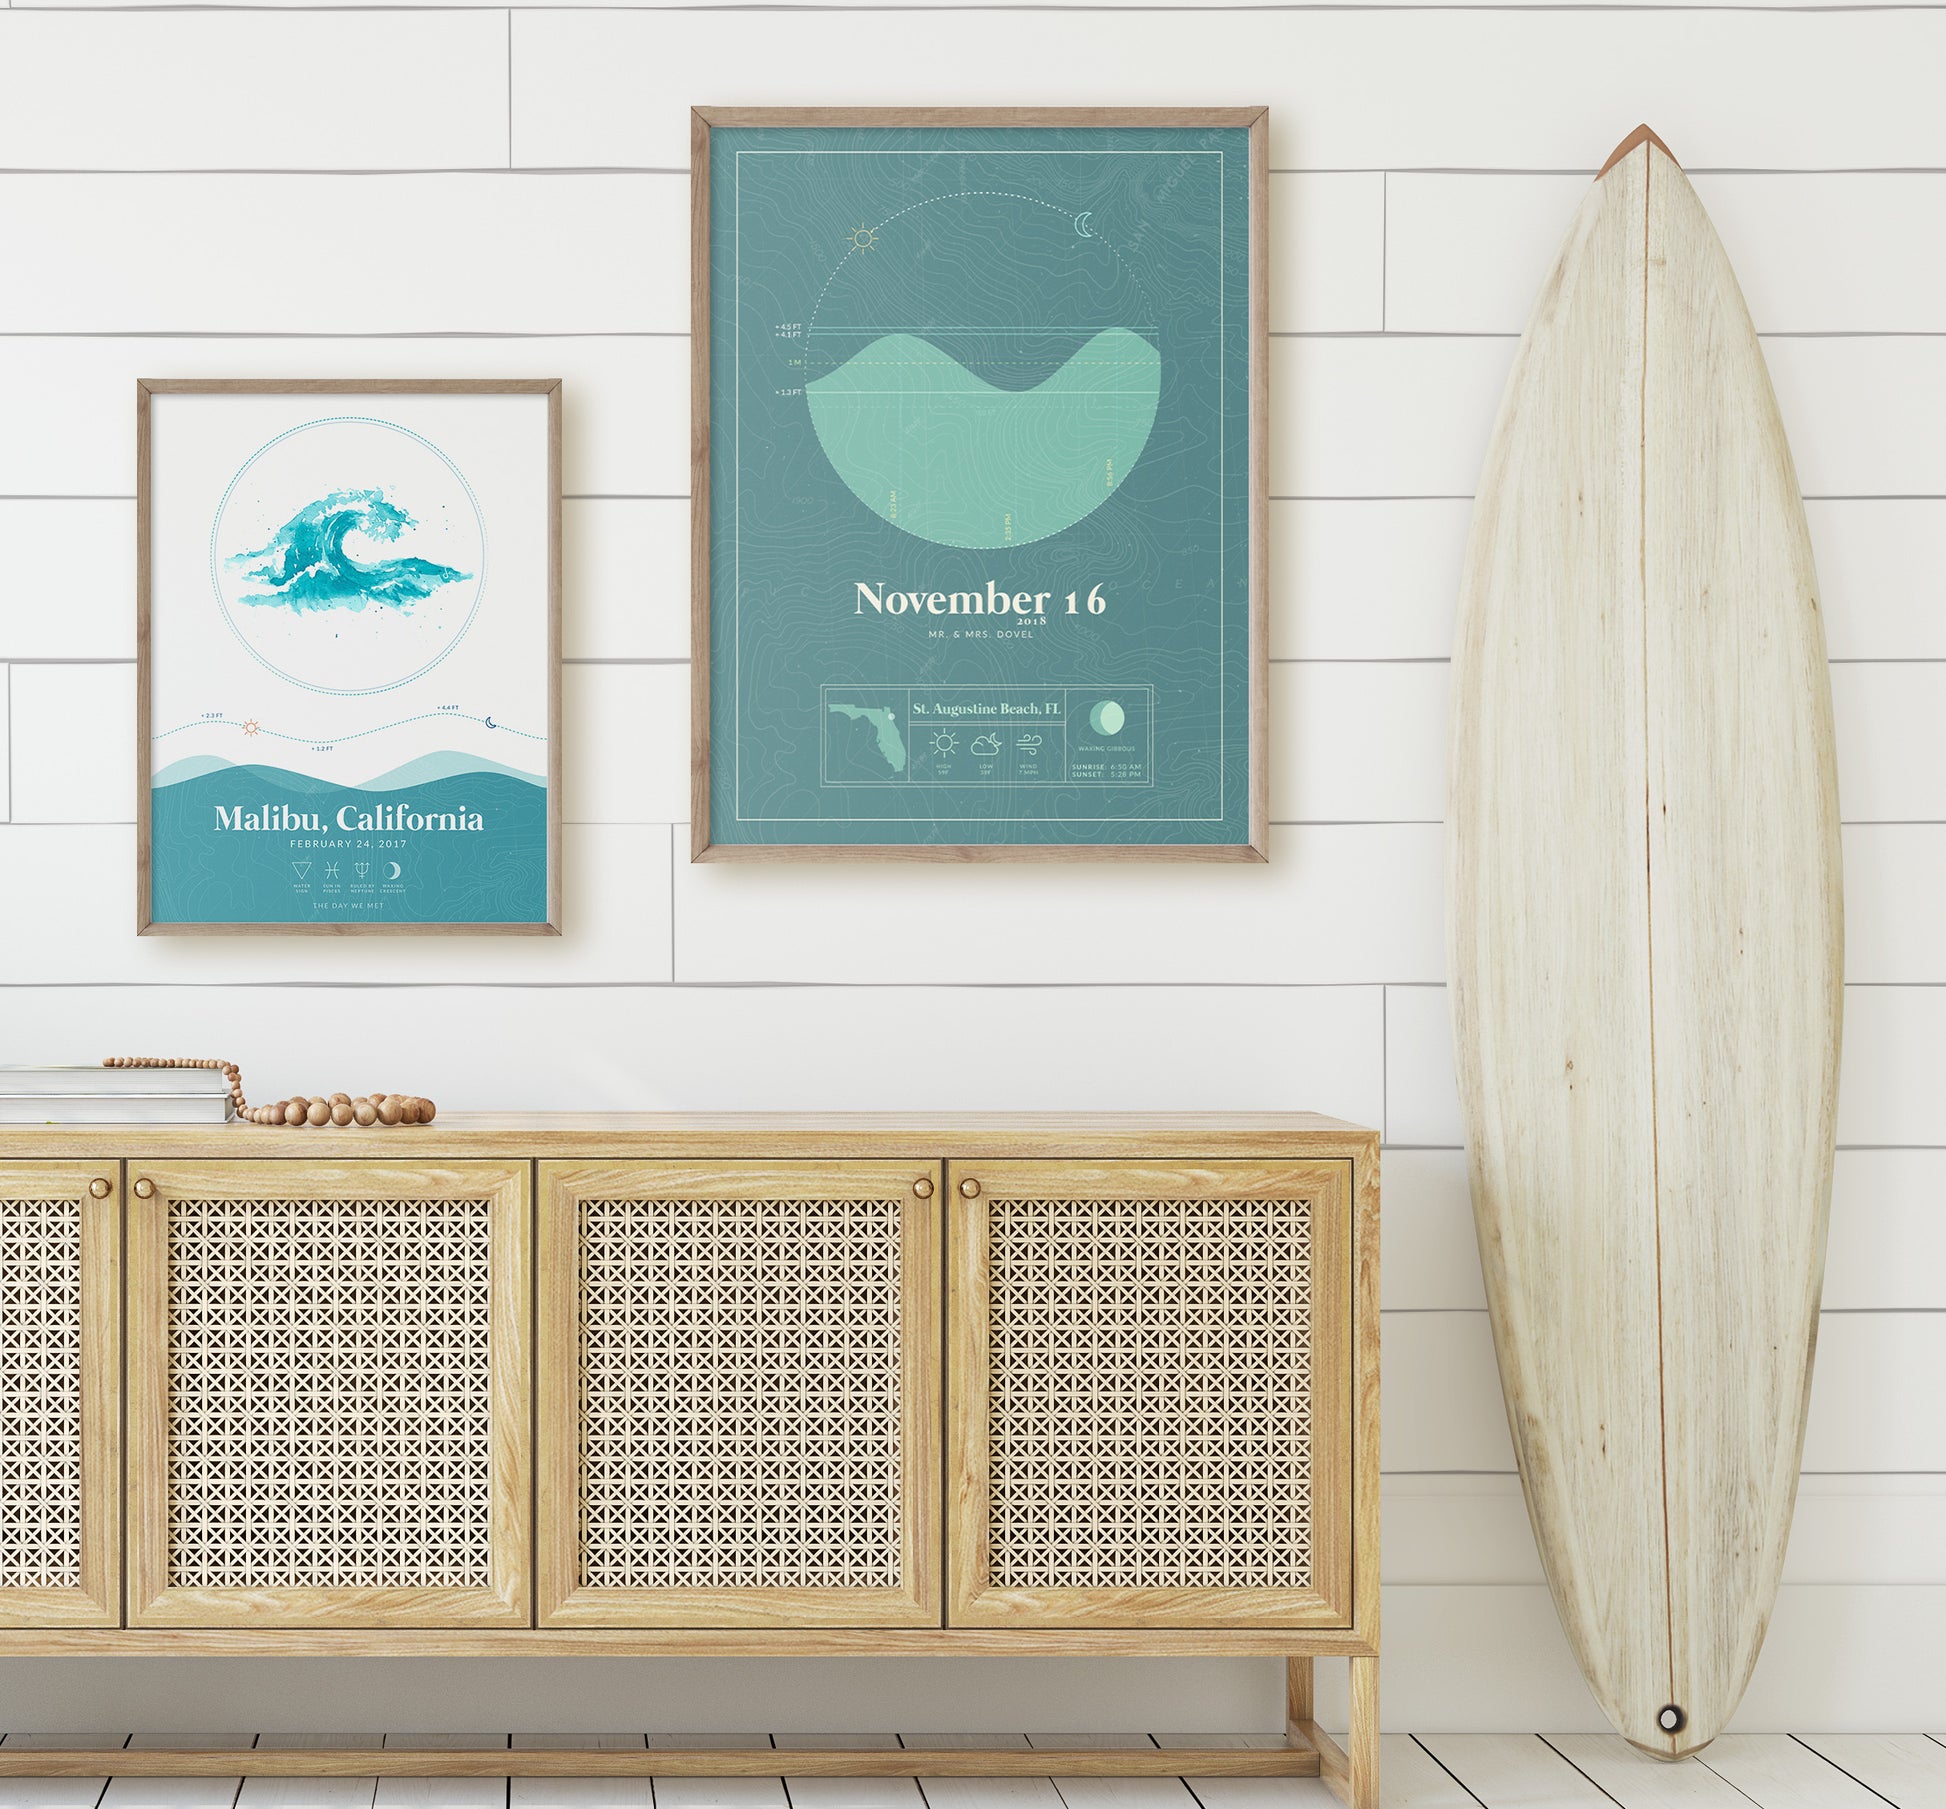 Waves Tide Map Poster and Nautical Tide Map Poster on a wall next to a surfboard in a home setting. Waves Tide Map Posters by Salt Atlas are custom posters showing the tide, astrology zodiac sign, and moon phase for a special day, like an anniversary or birthday.